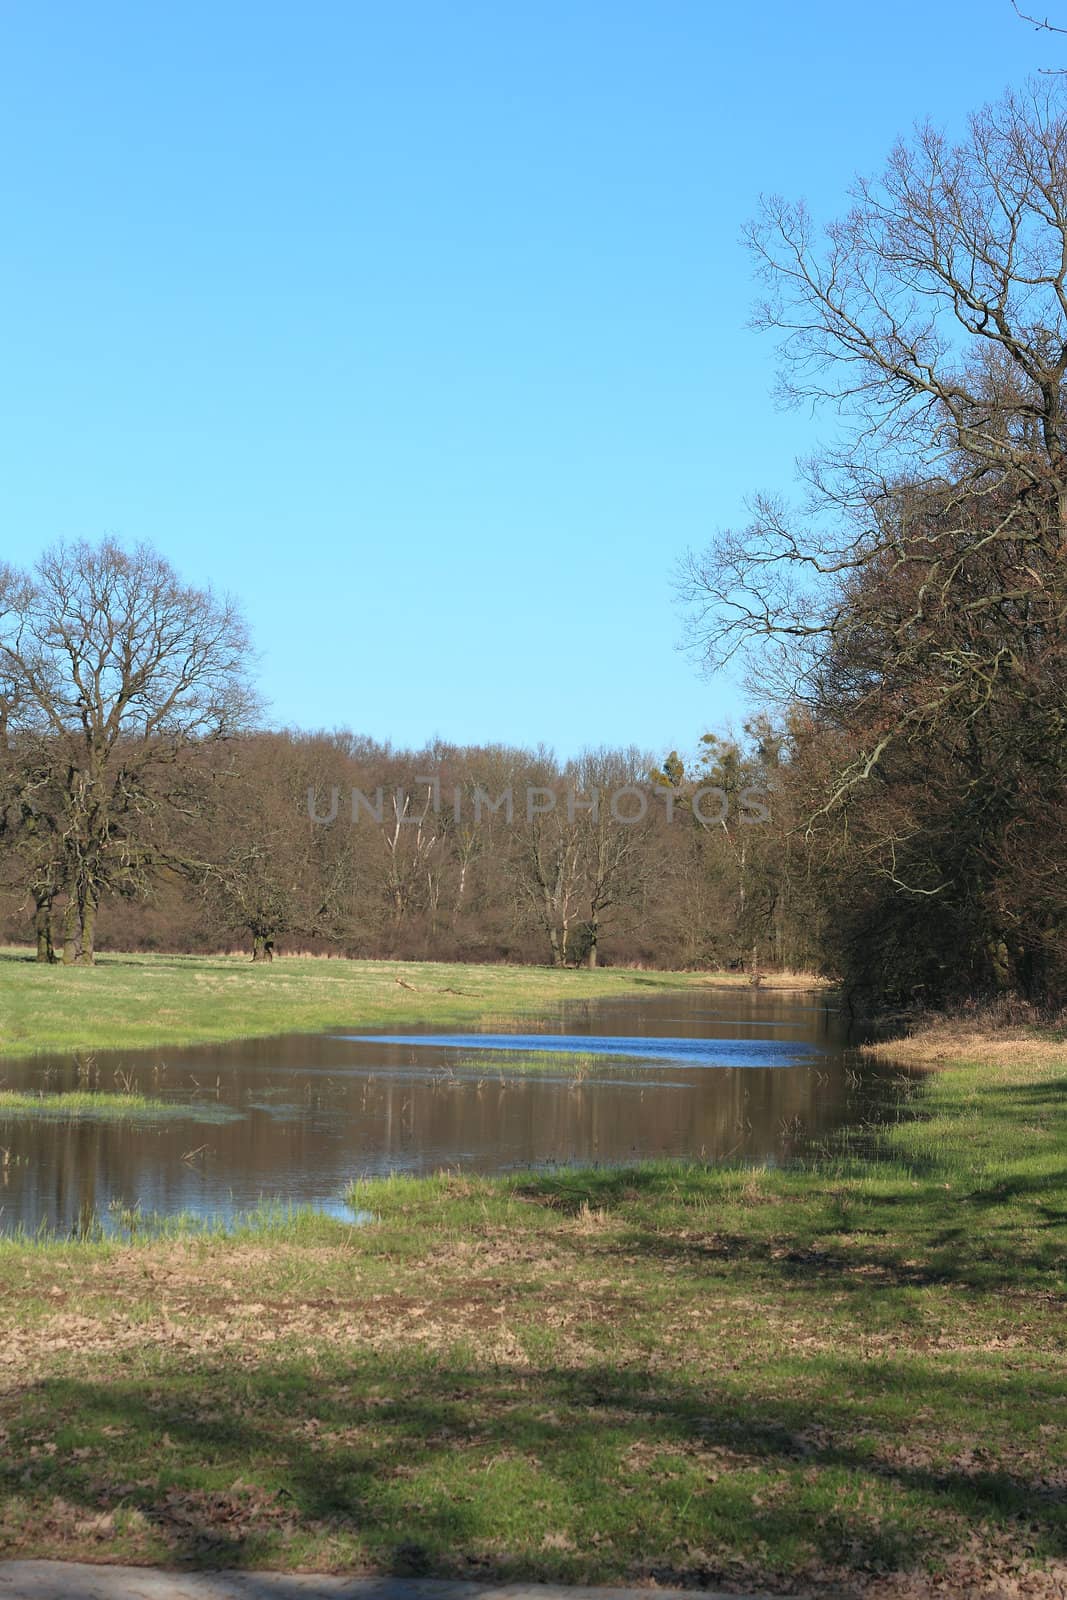 Pond in a floodplain in early spring